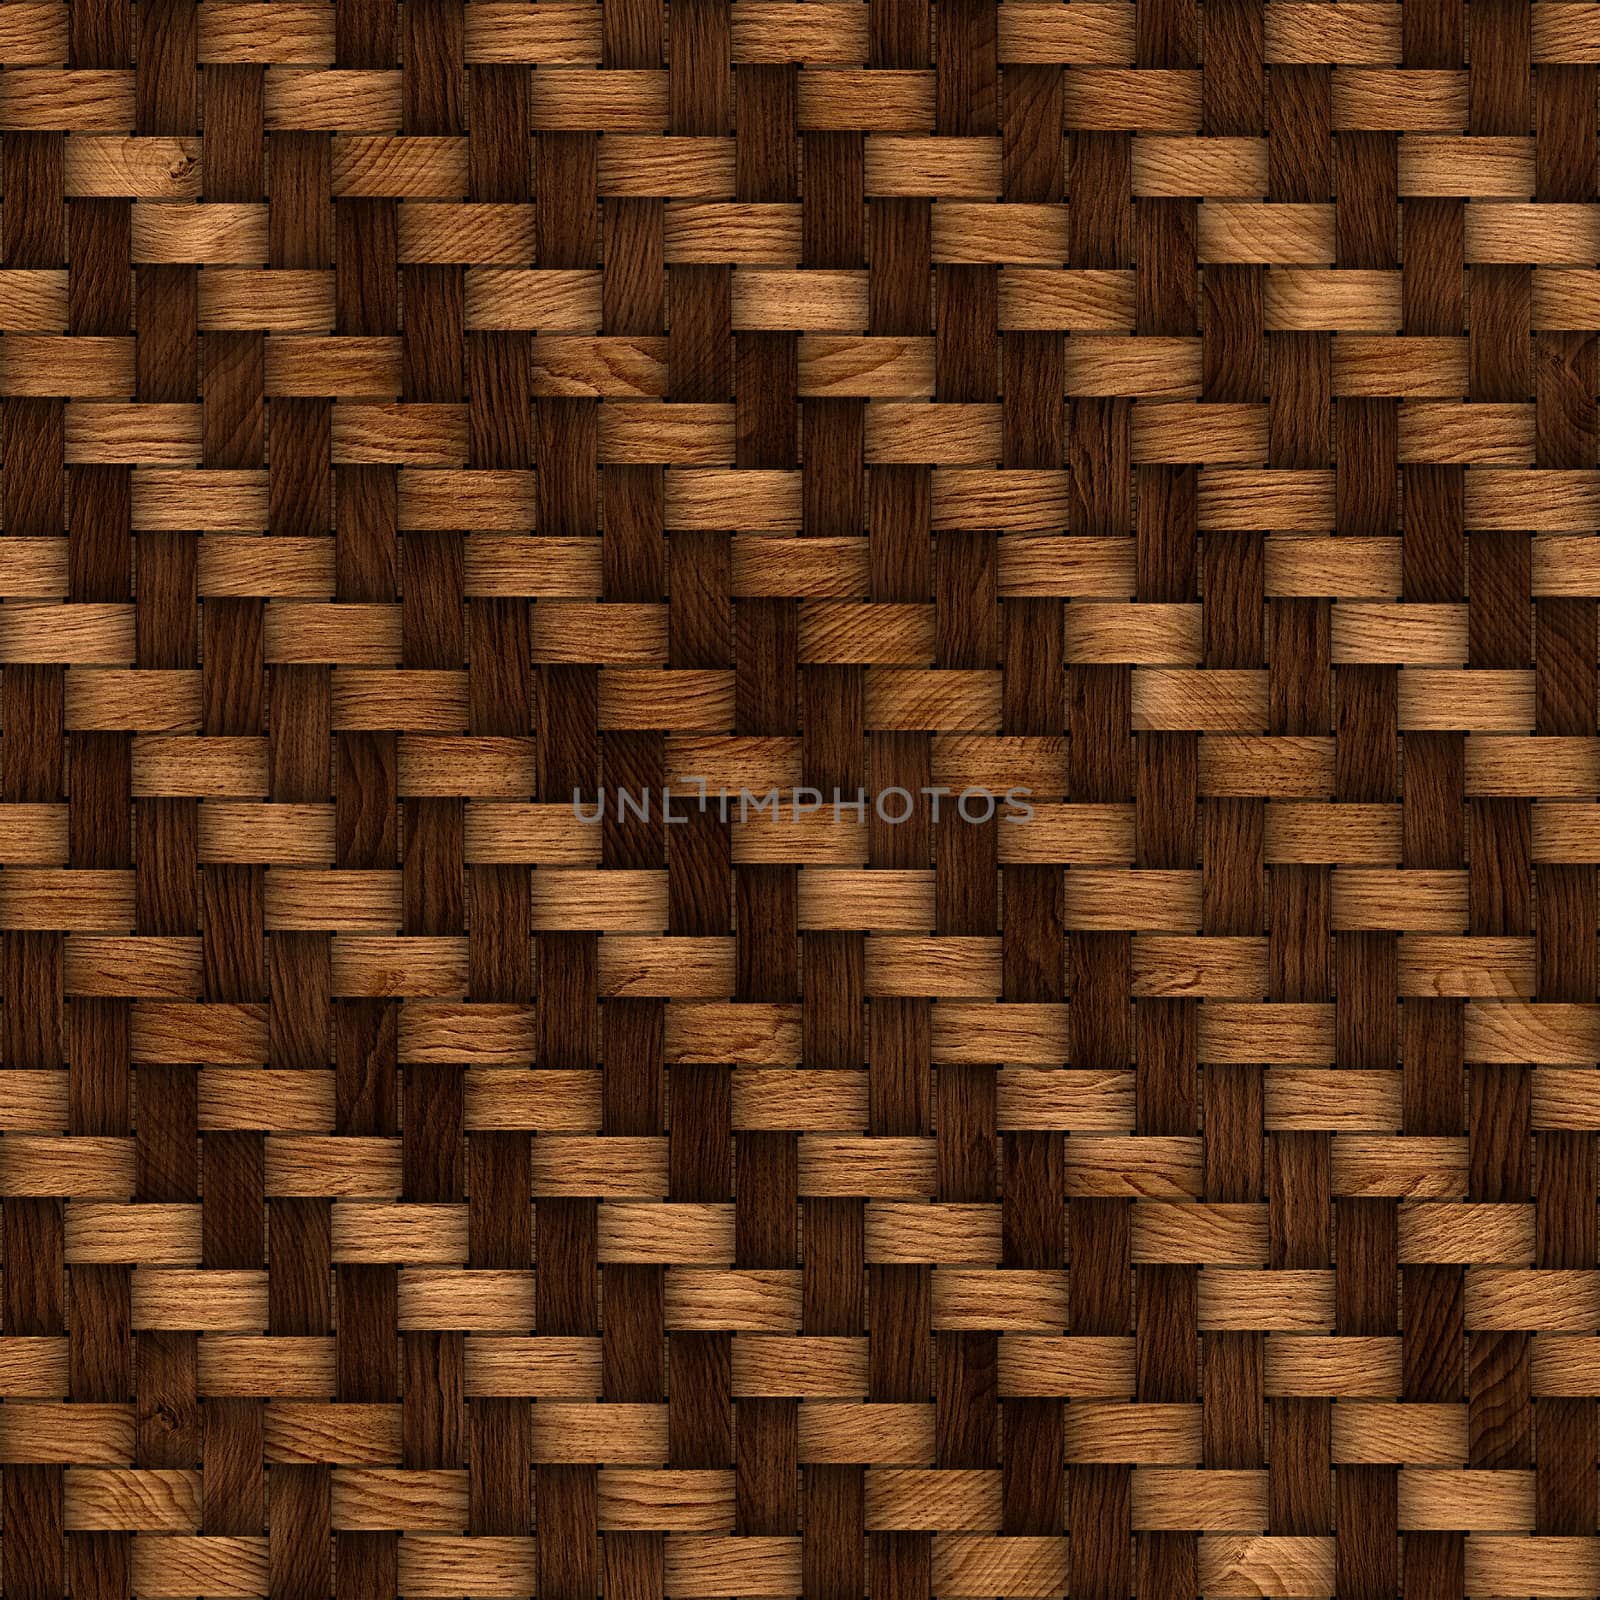 Wooden weave texture background. Abstract decorative wooden textured basket weaving background. Seamless pattern